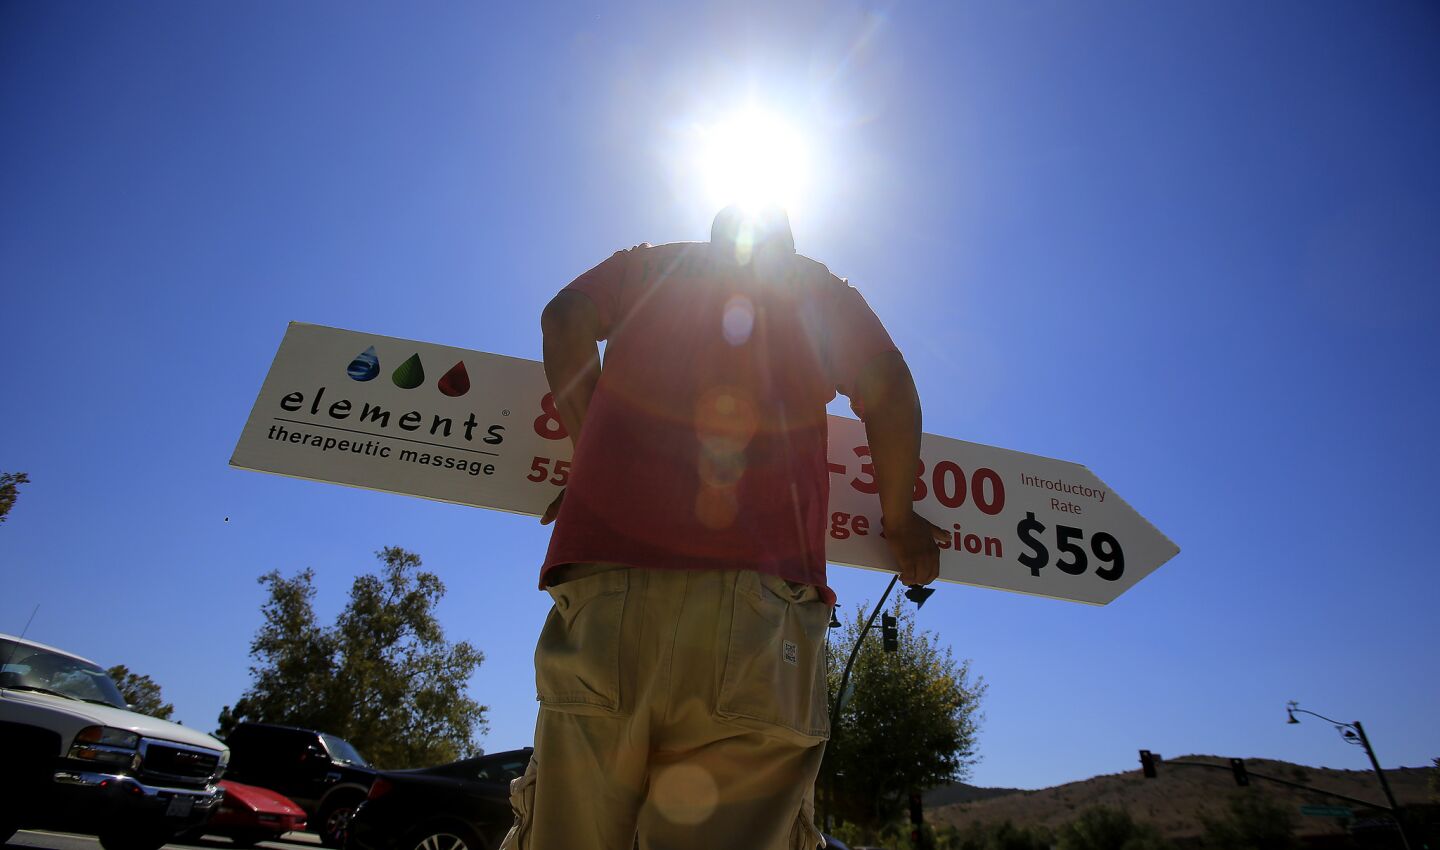 Sign spinner Orlando Reyes points cars to a Thousand Oaks Blvd. massage business under the hot sun.